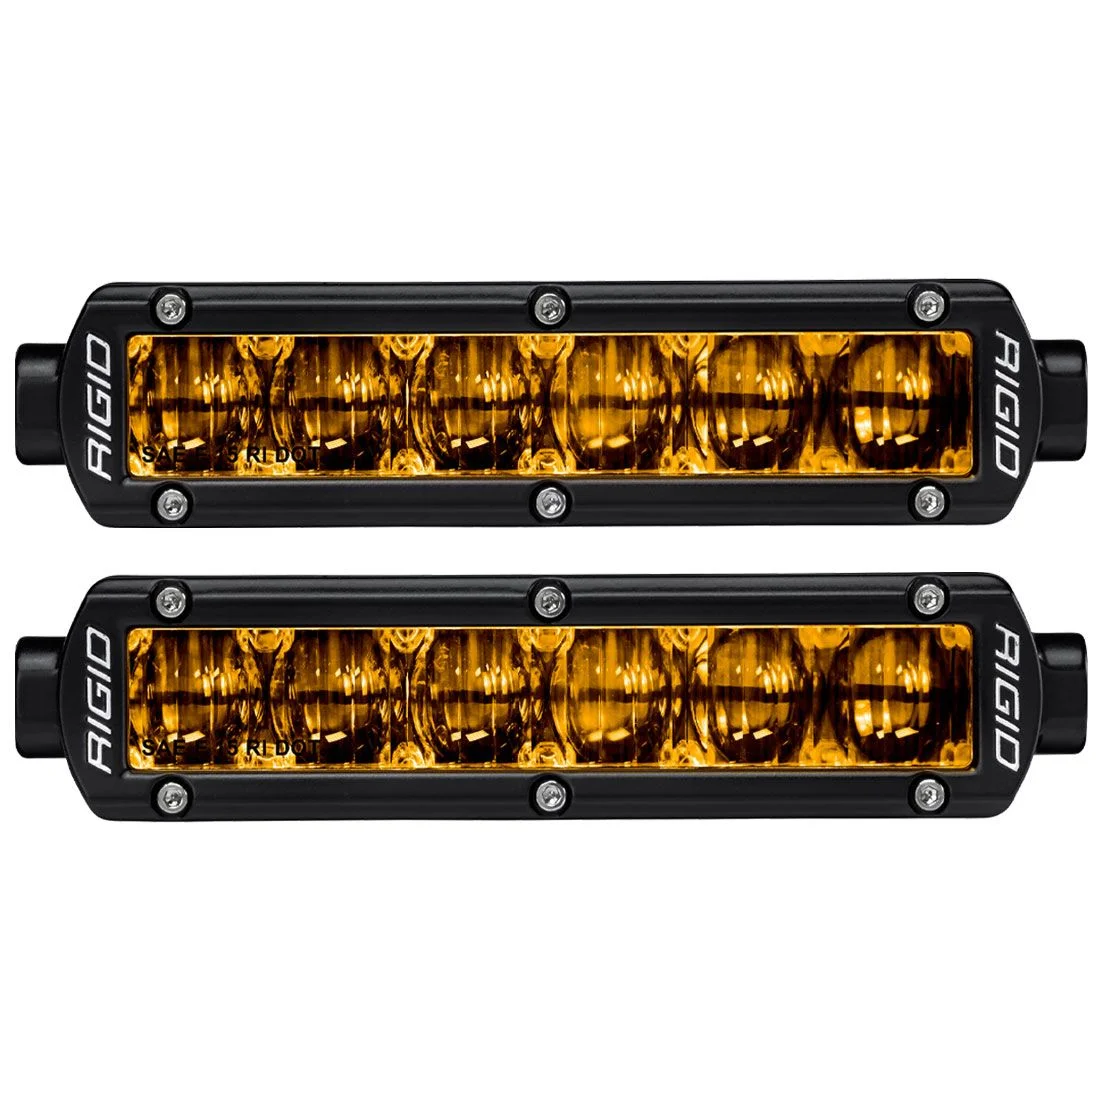 SAE COMPLIANT SR-SERIES LIGHT BARS 6'' PAIR, 20'' AND 30''